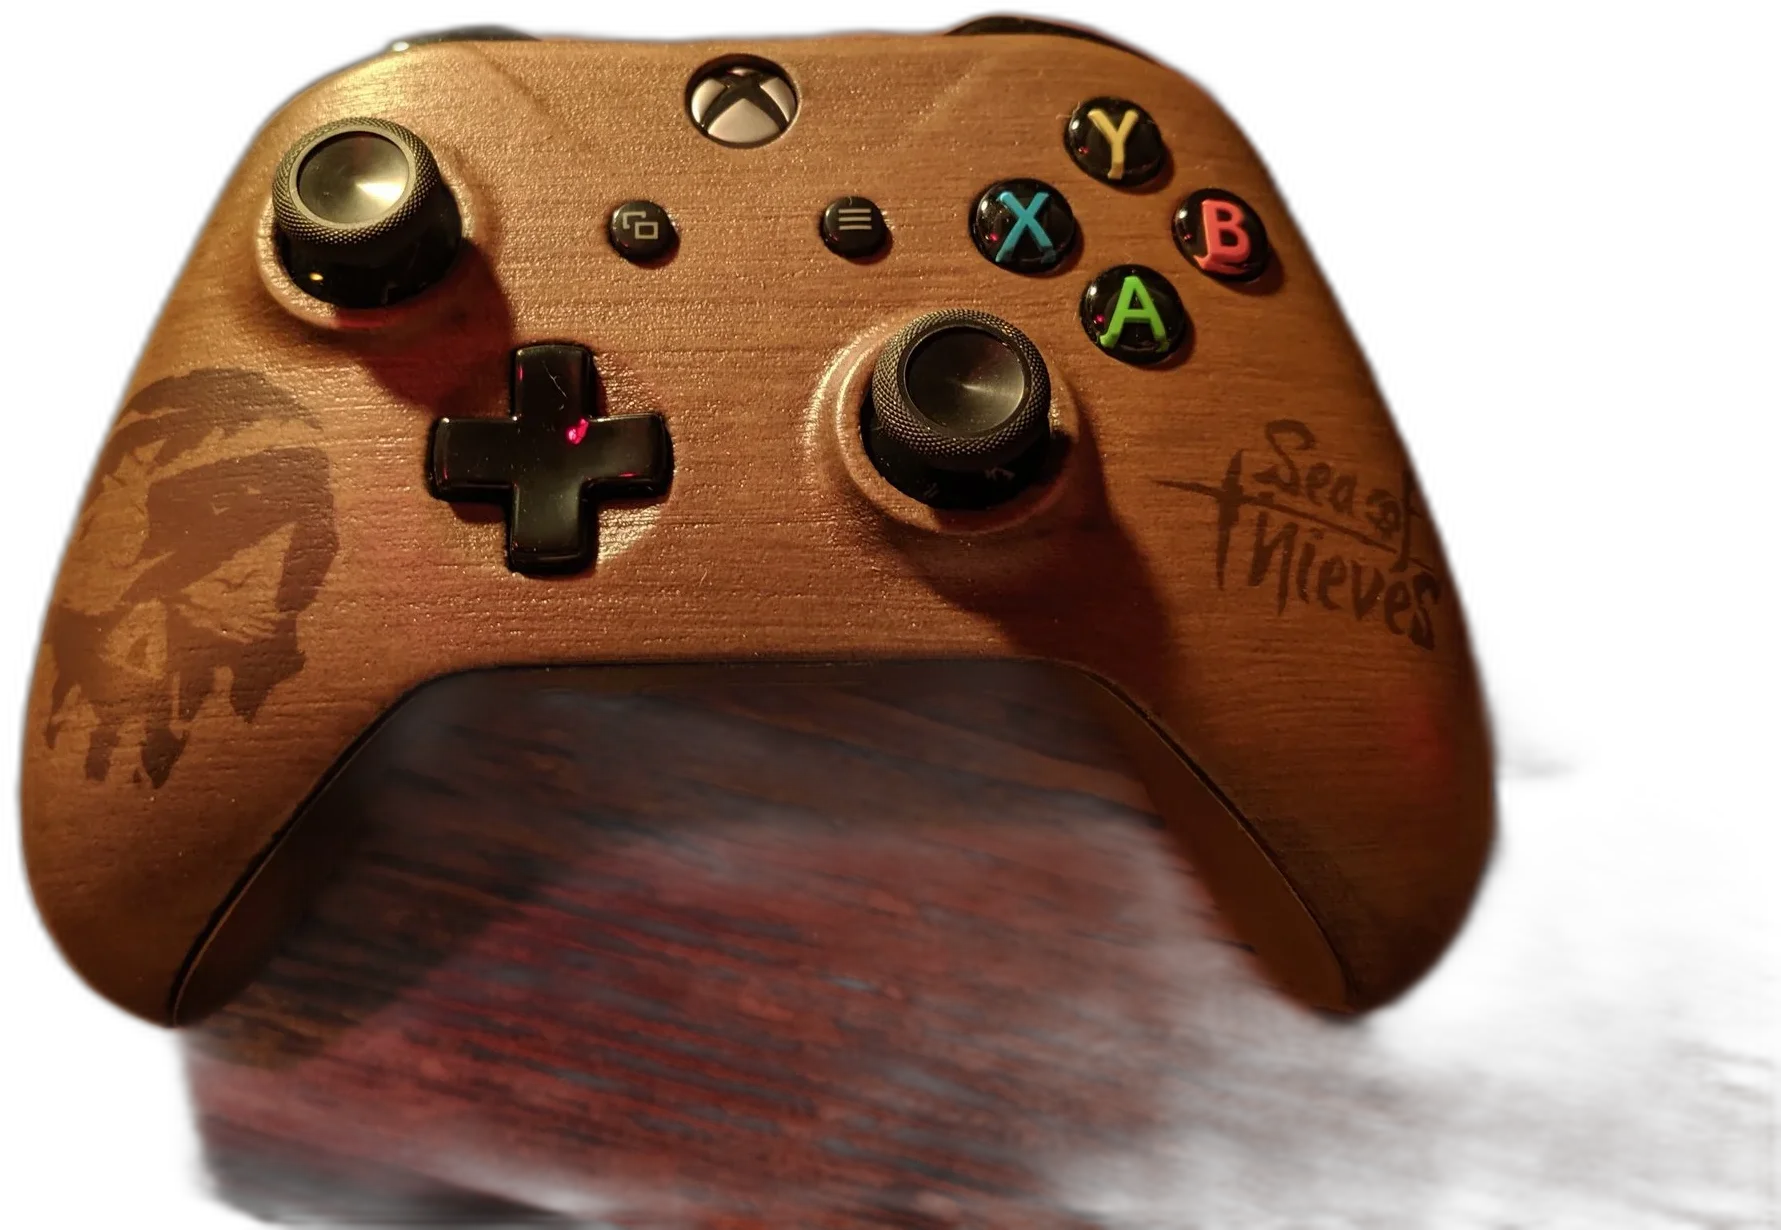  Microsoft Xbox One S Sea of Thieves Model 2 Controller